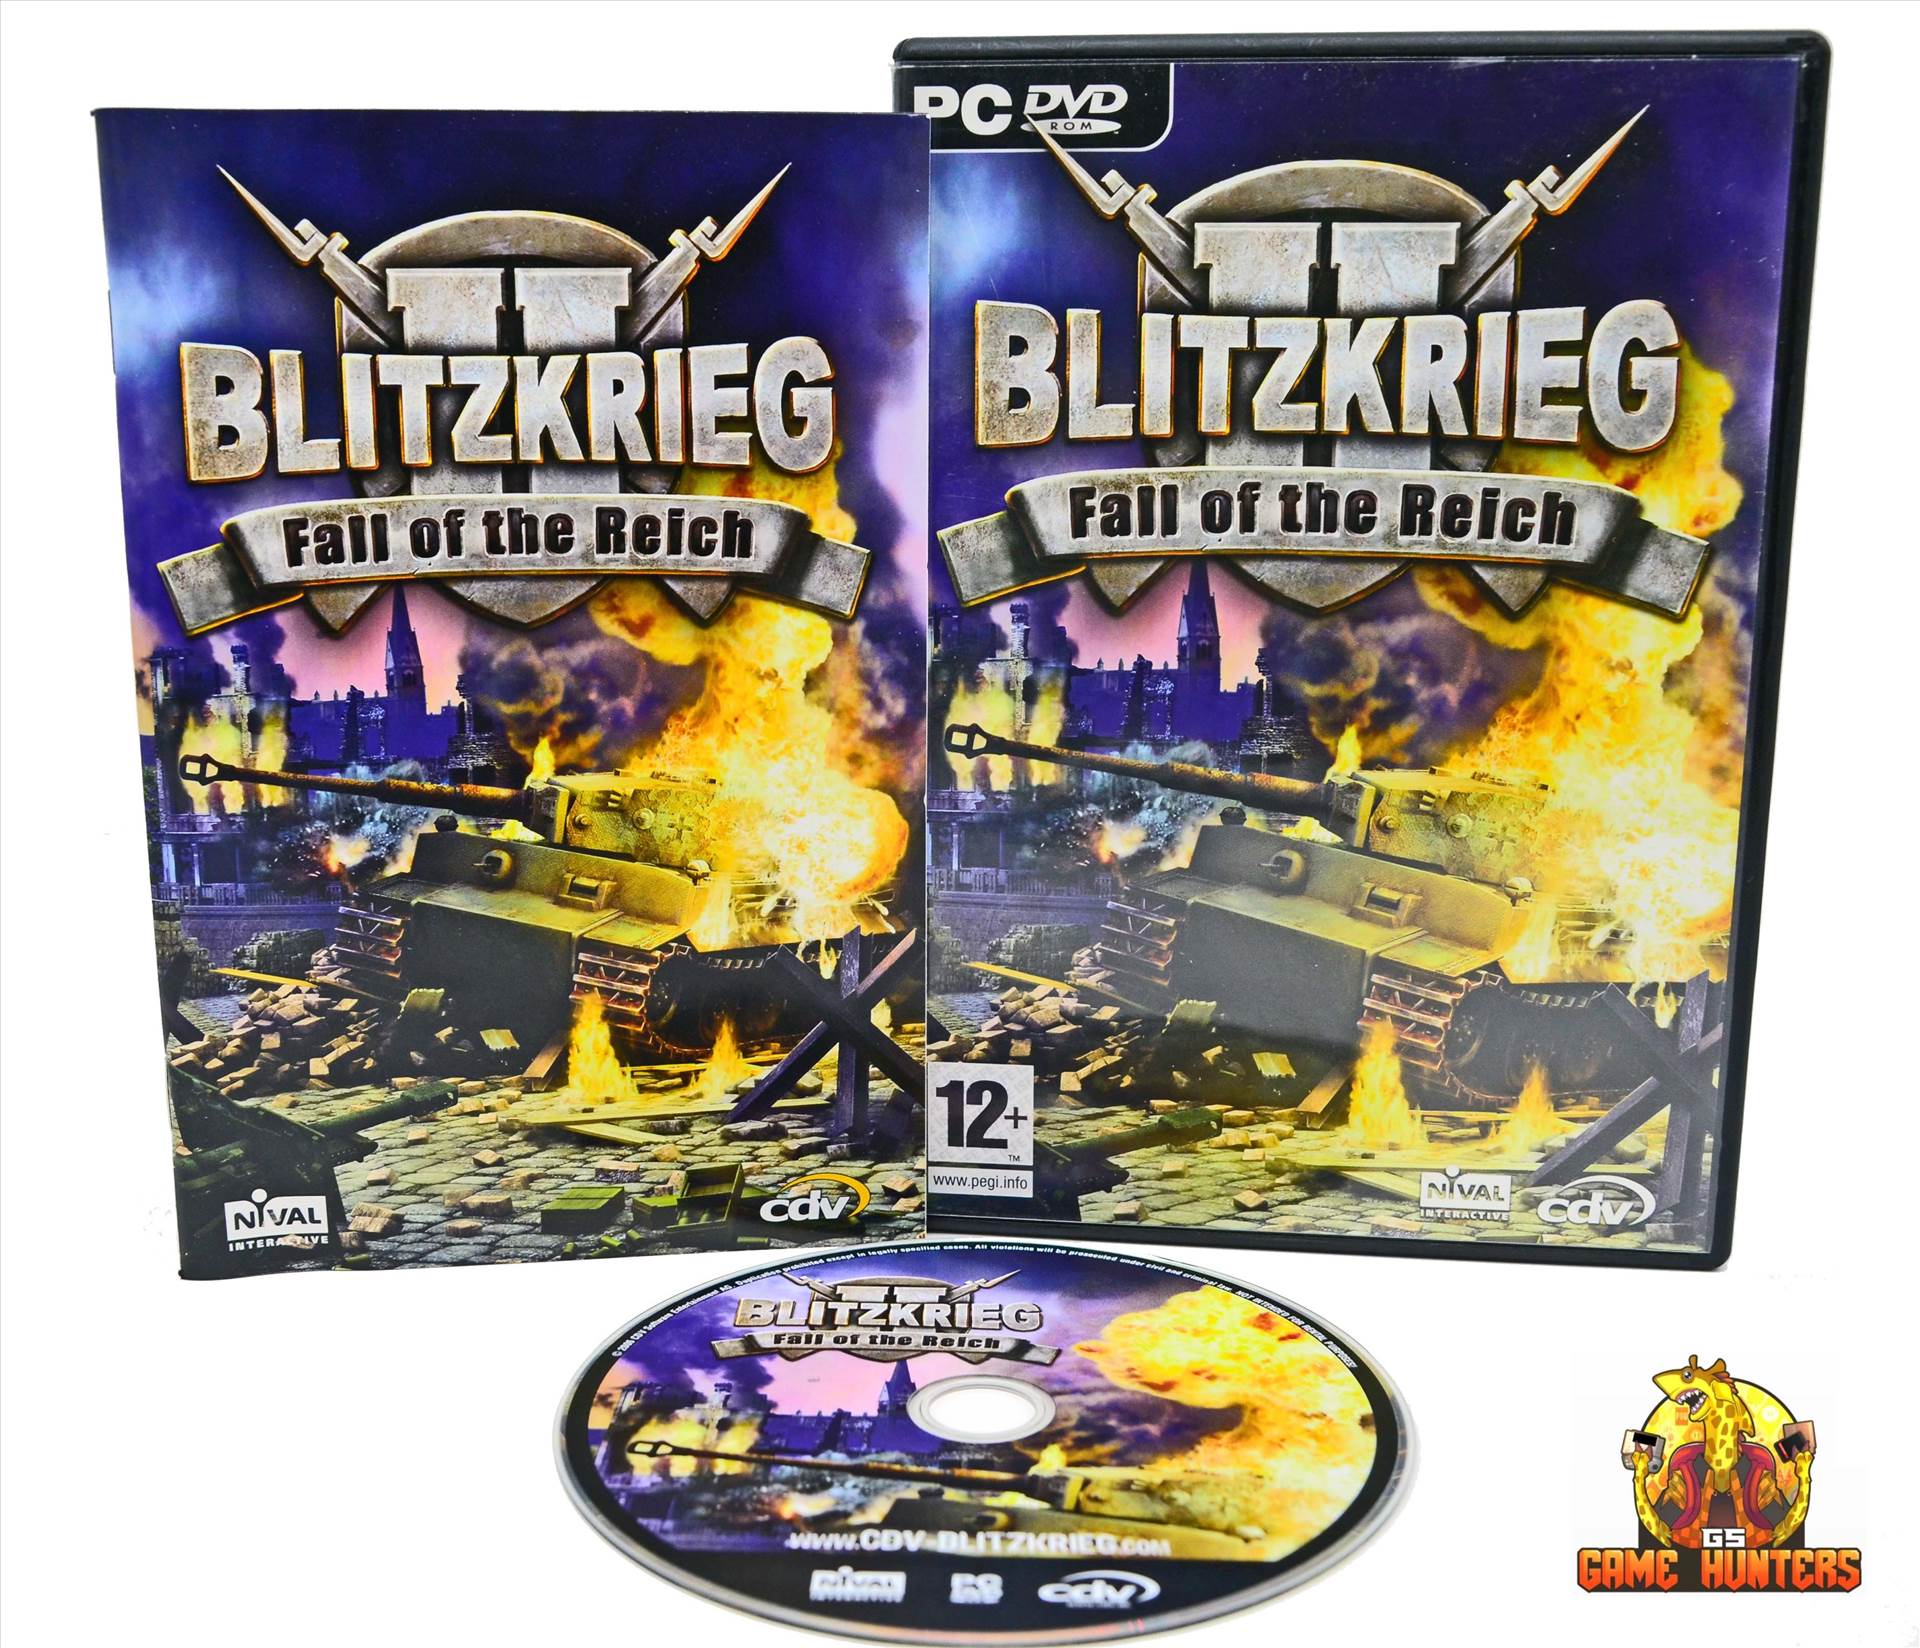 Blitzkrieg 2 Fall of the Reich Case, Manual & Disc.jpg  by GSGAMEHUNTERS